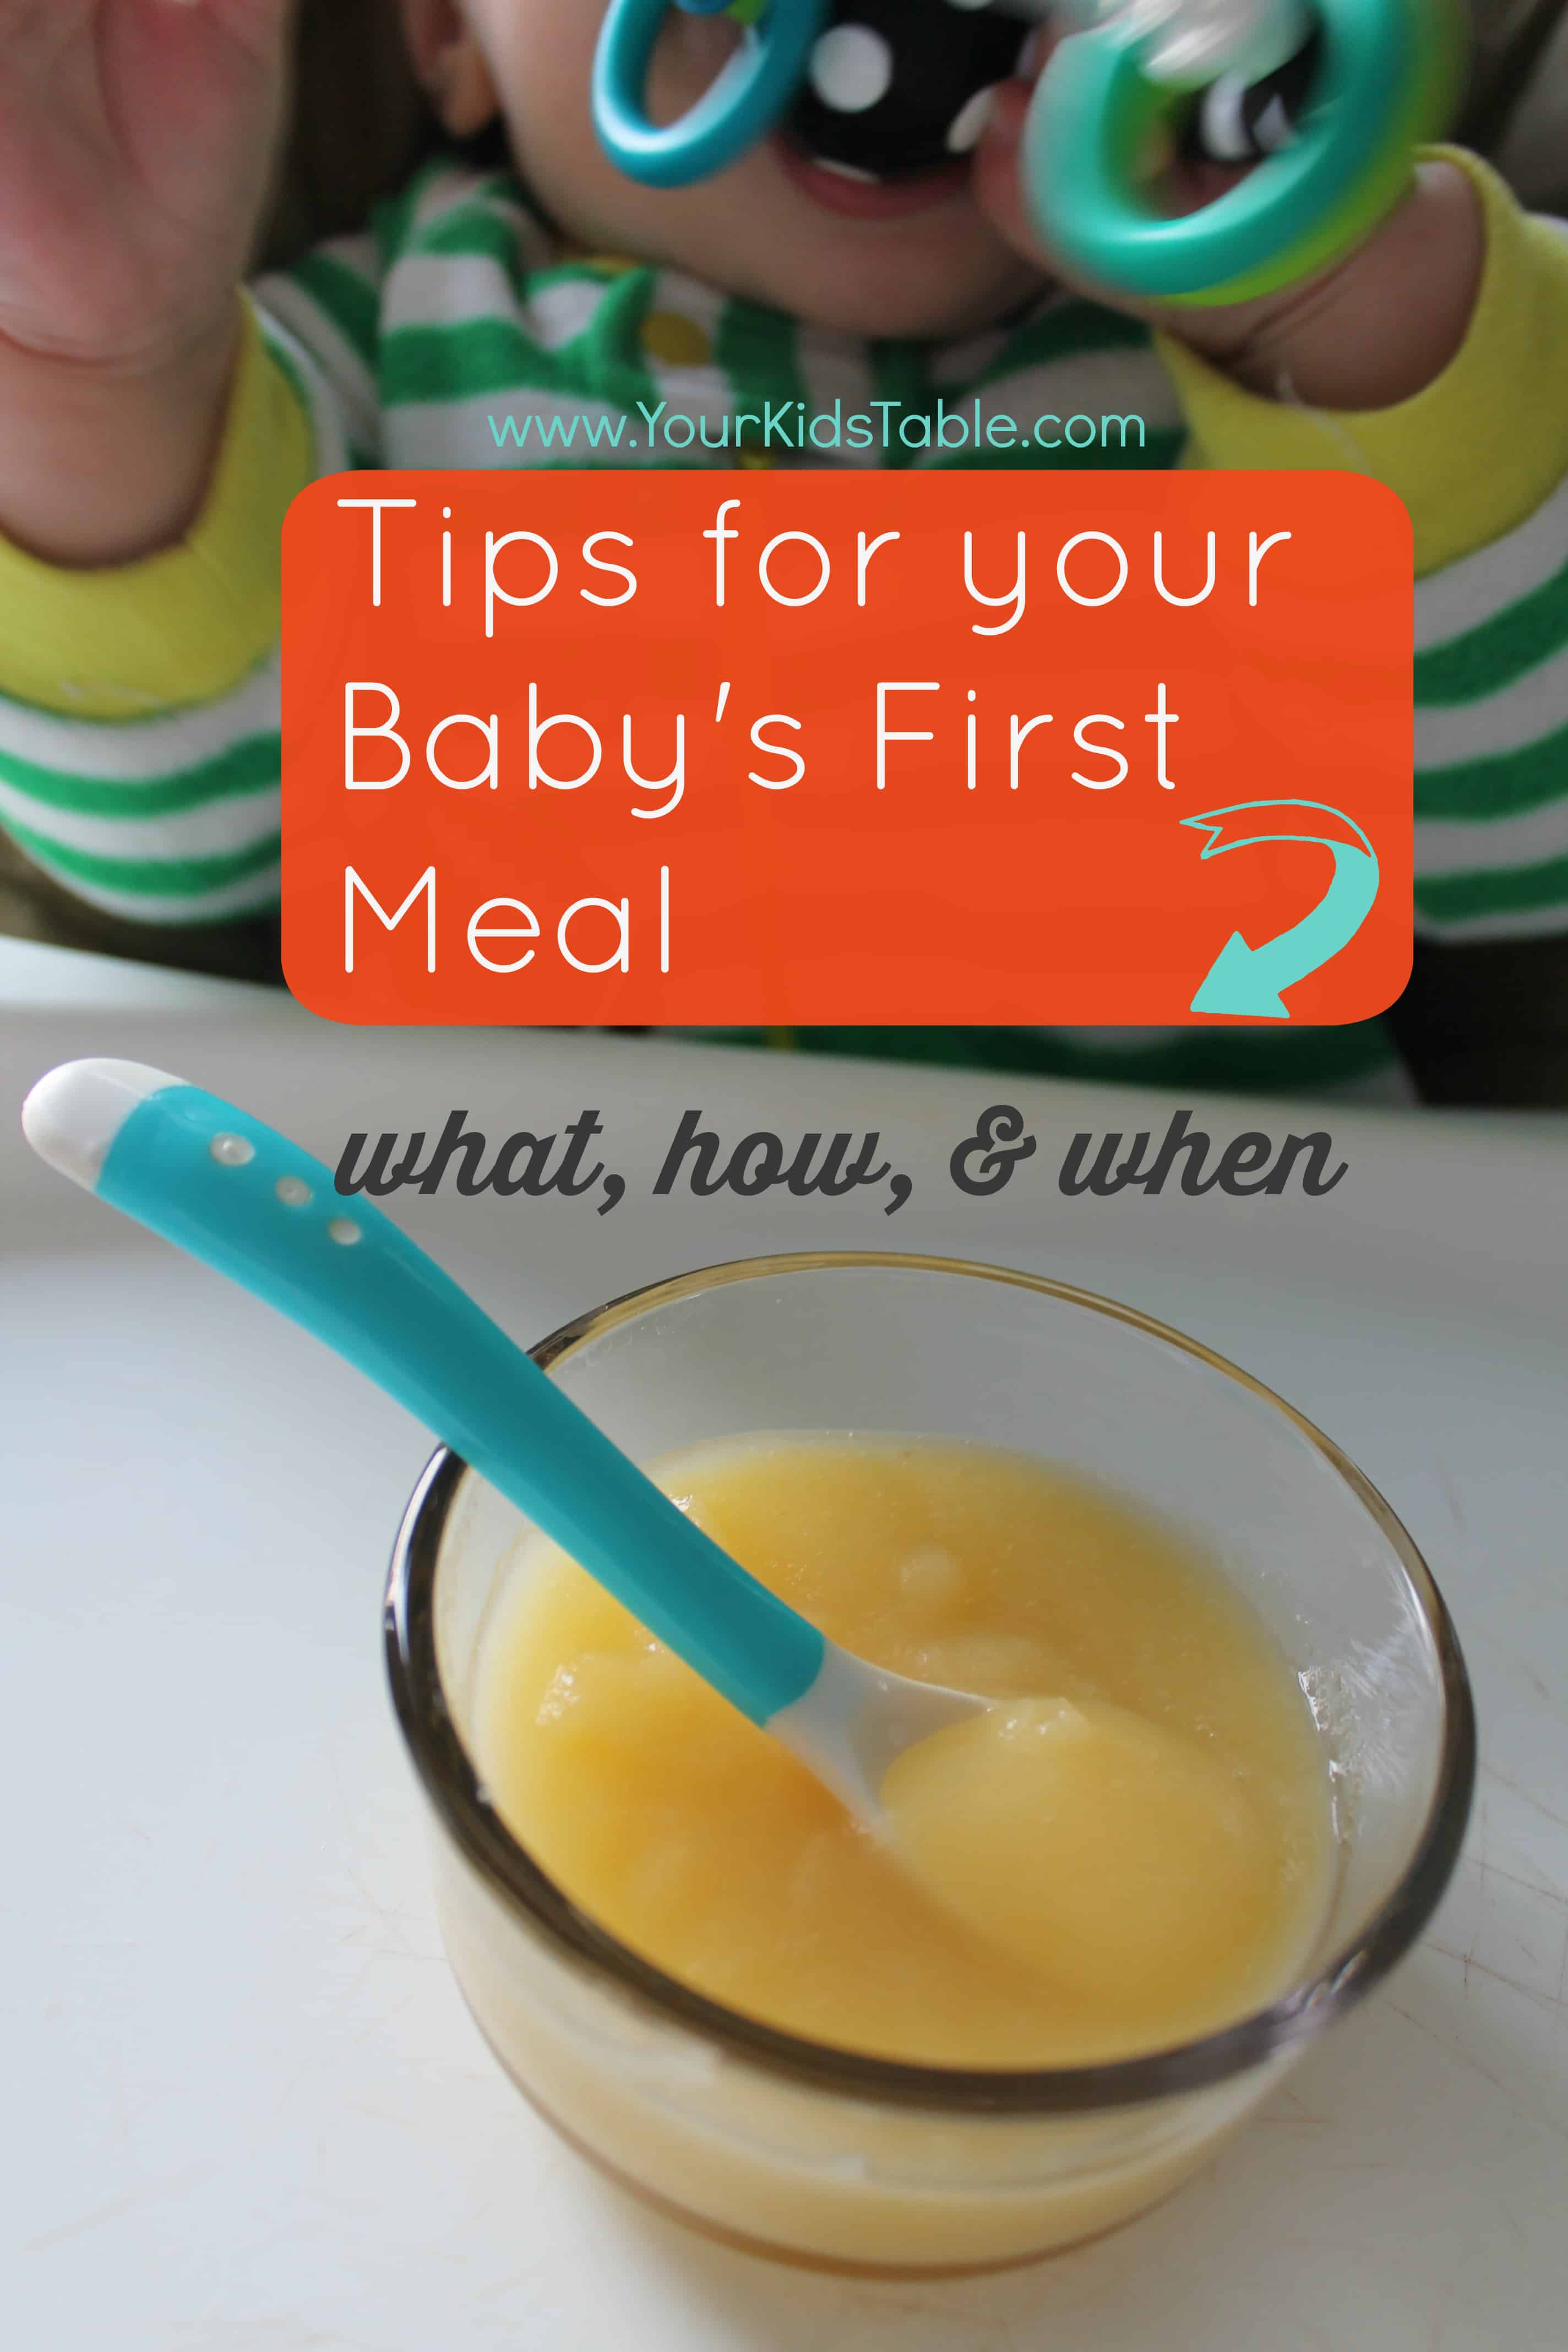 Introducing Baby Food: Everything You Need to Know - Your Kid's Table